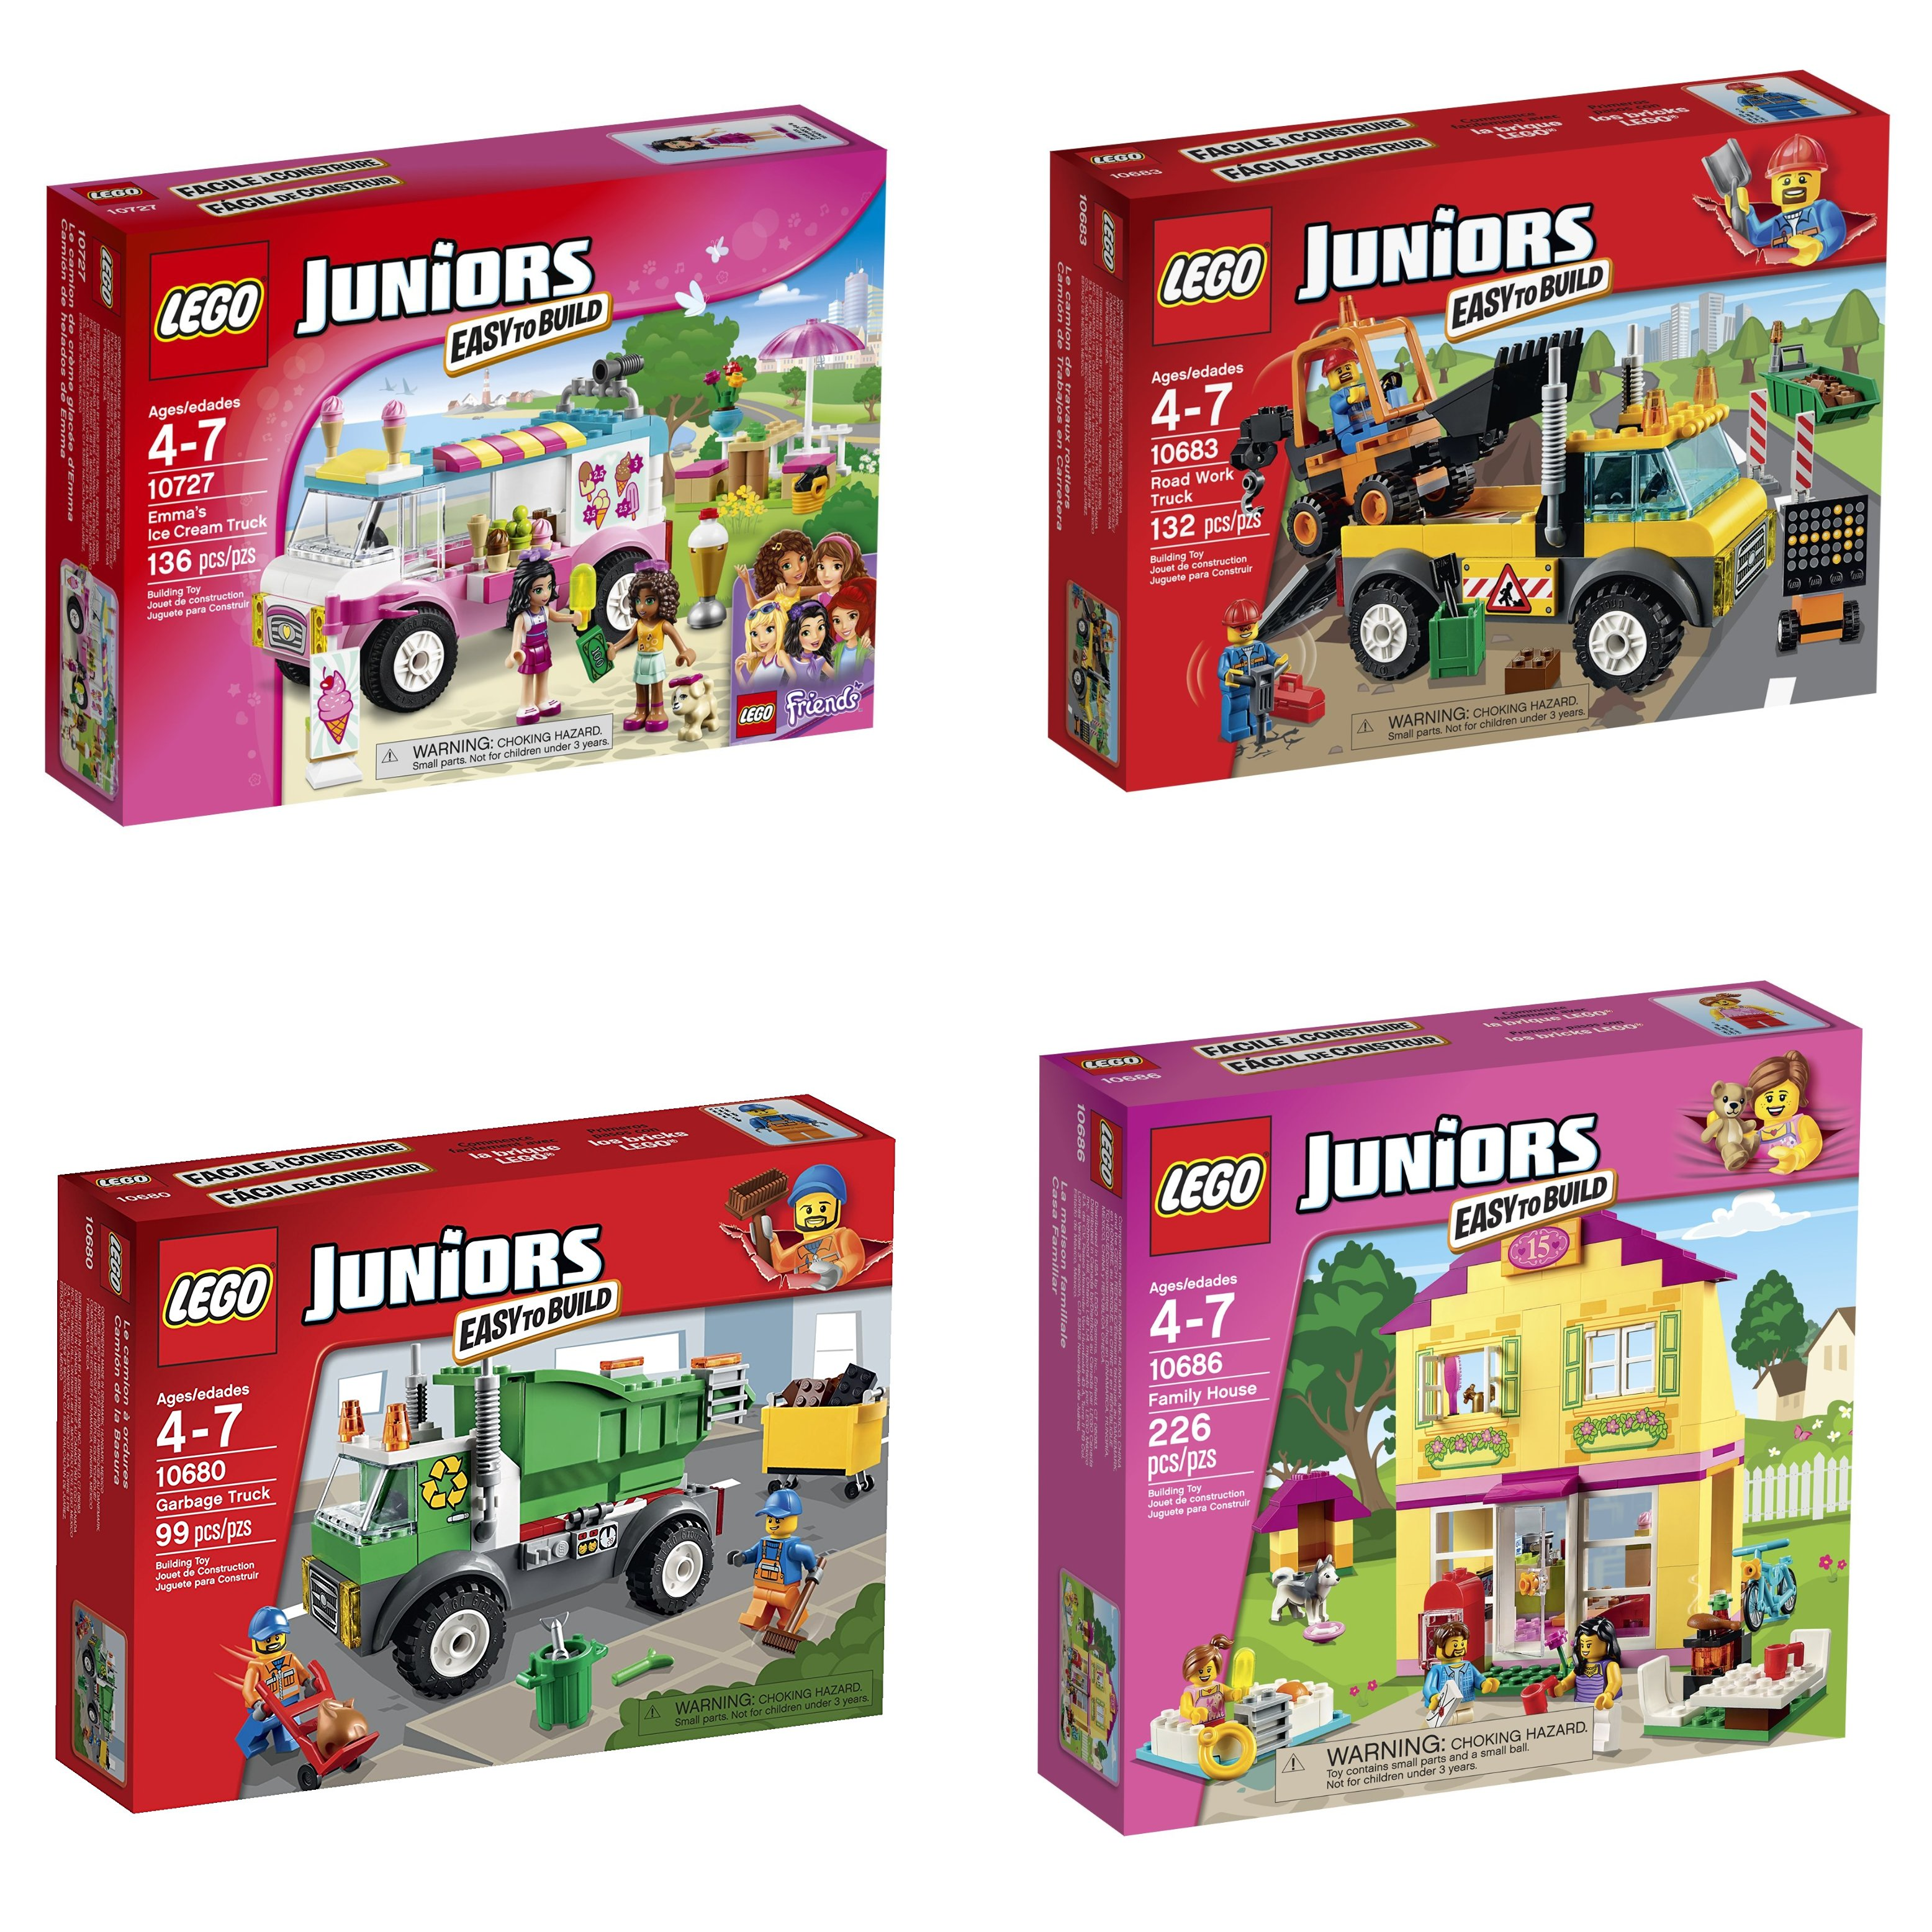 Amazon: Huge List of LEGO Juniors Sets on Sale! Prices Start at $7.79!